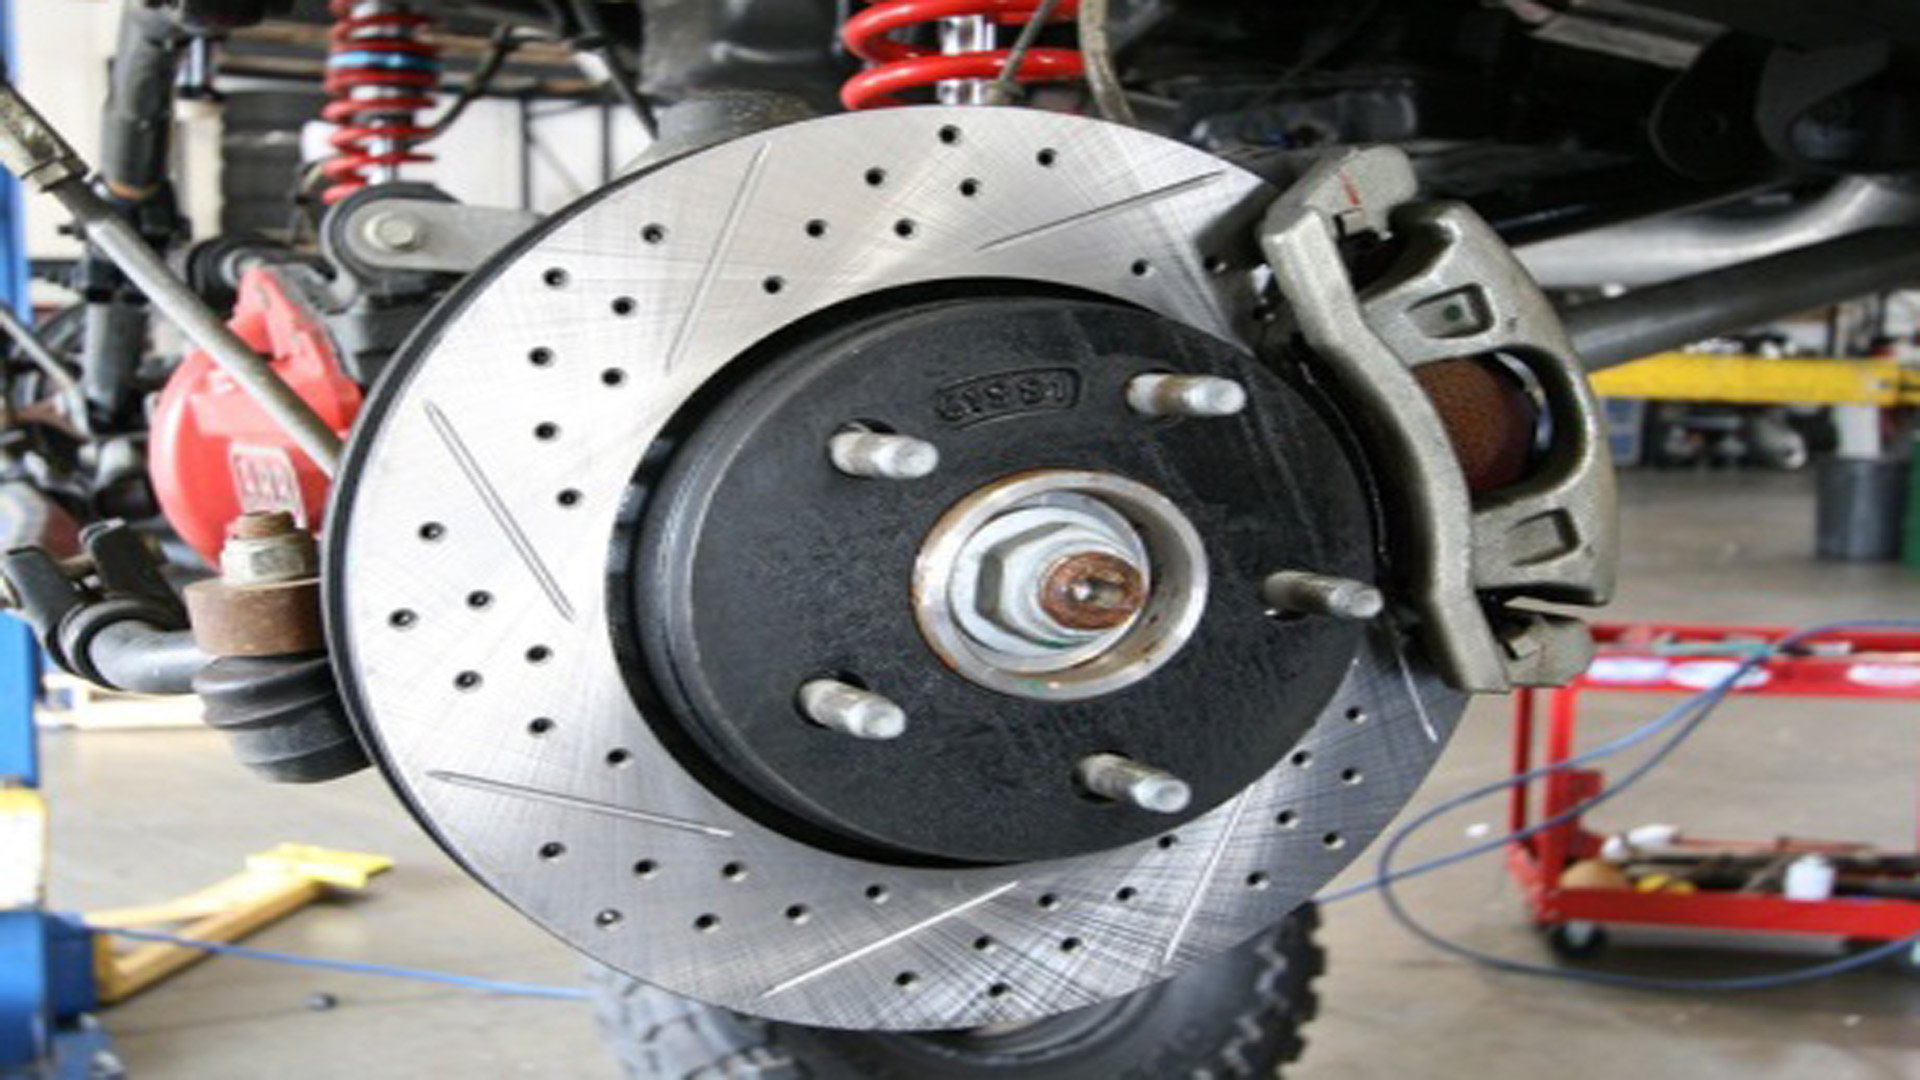 Jeep Wrangler JK: How to Replace Brake Pads, Calipers, and Rotors | Jk-forum